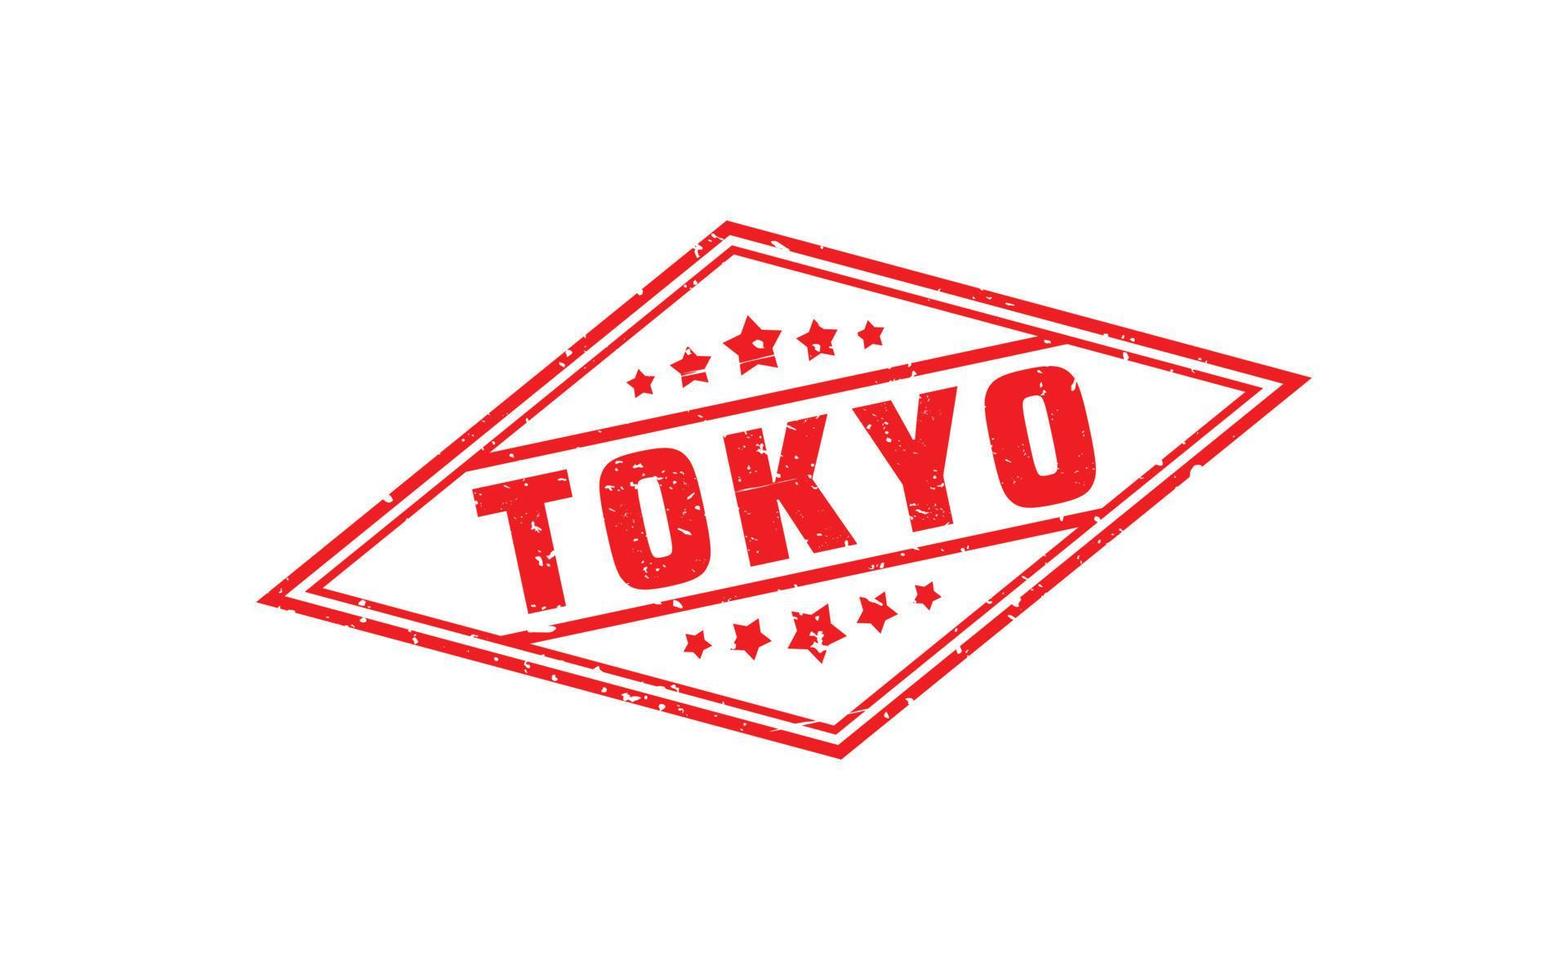 TOKYO JAPAN rubber stamp with grunge style on white background vector